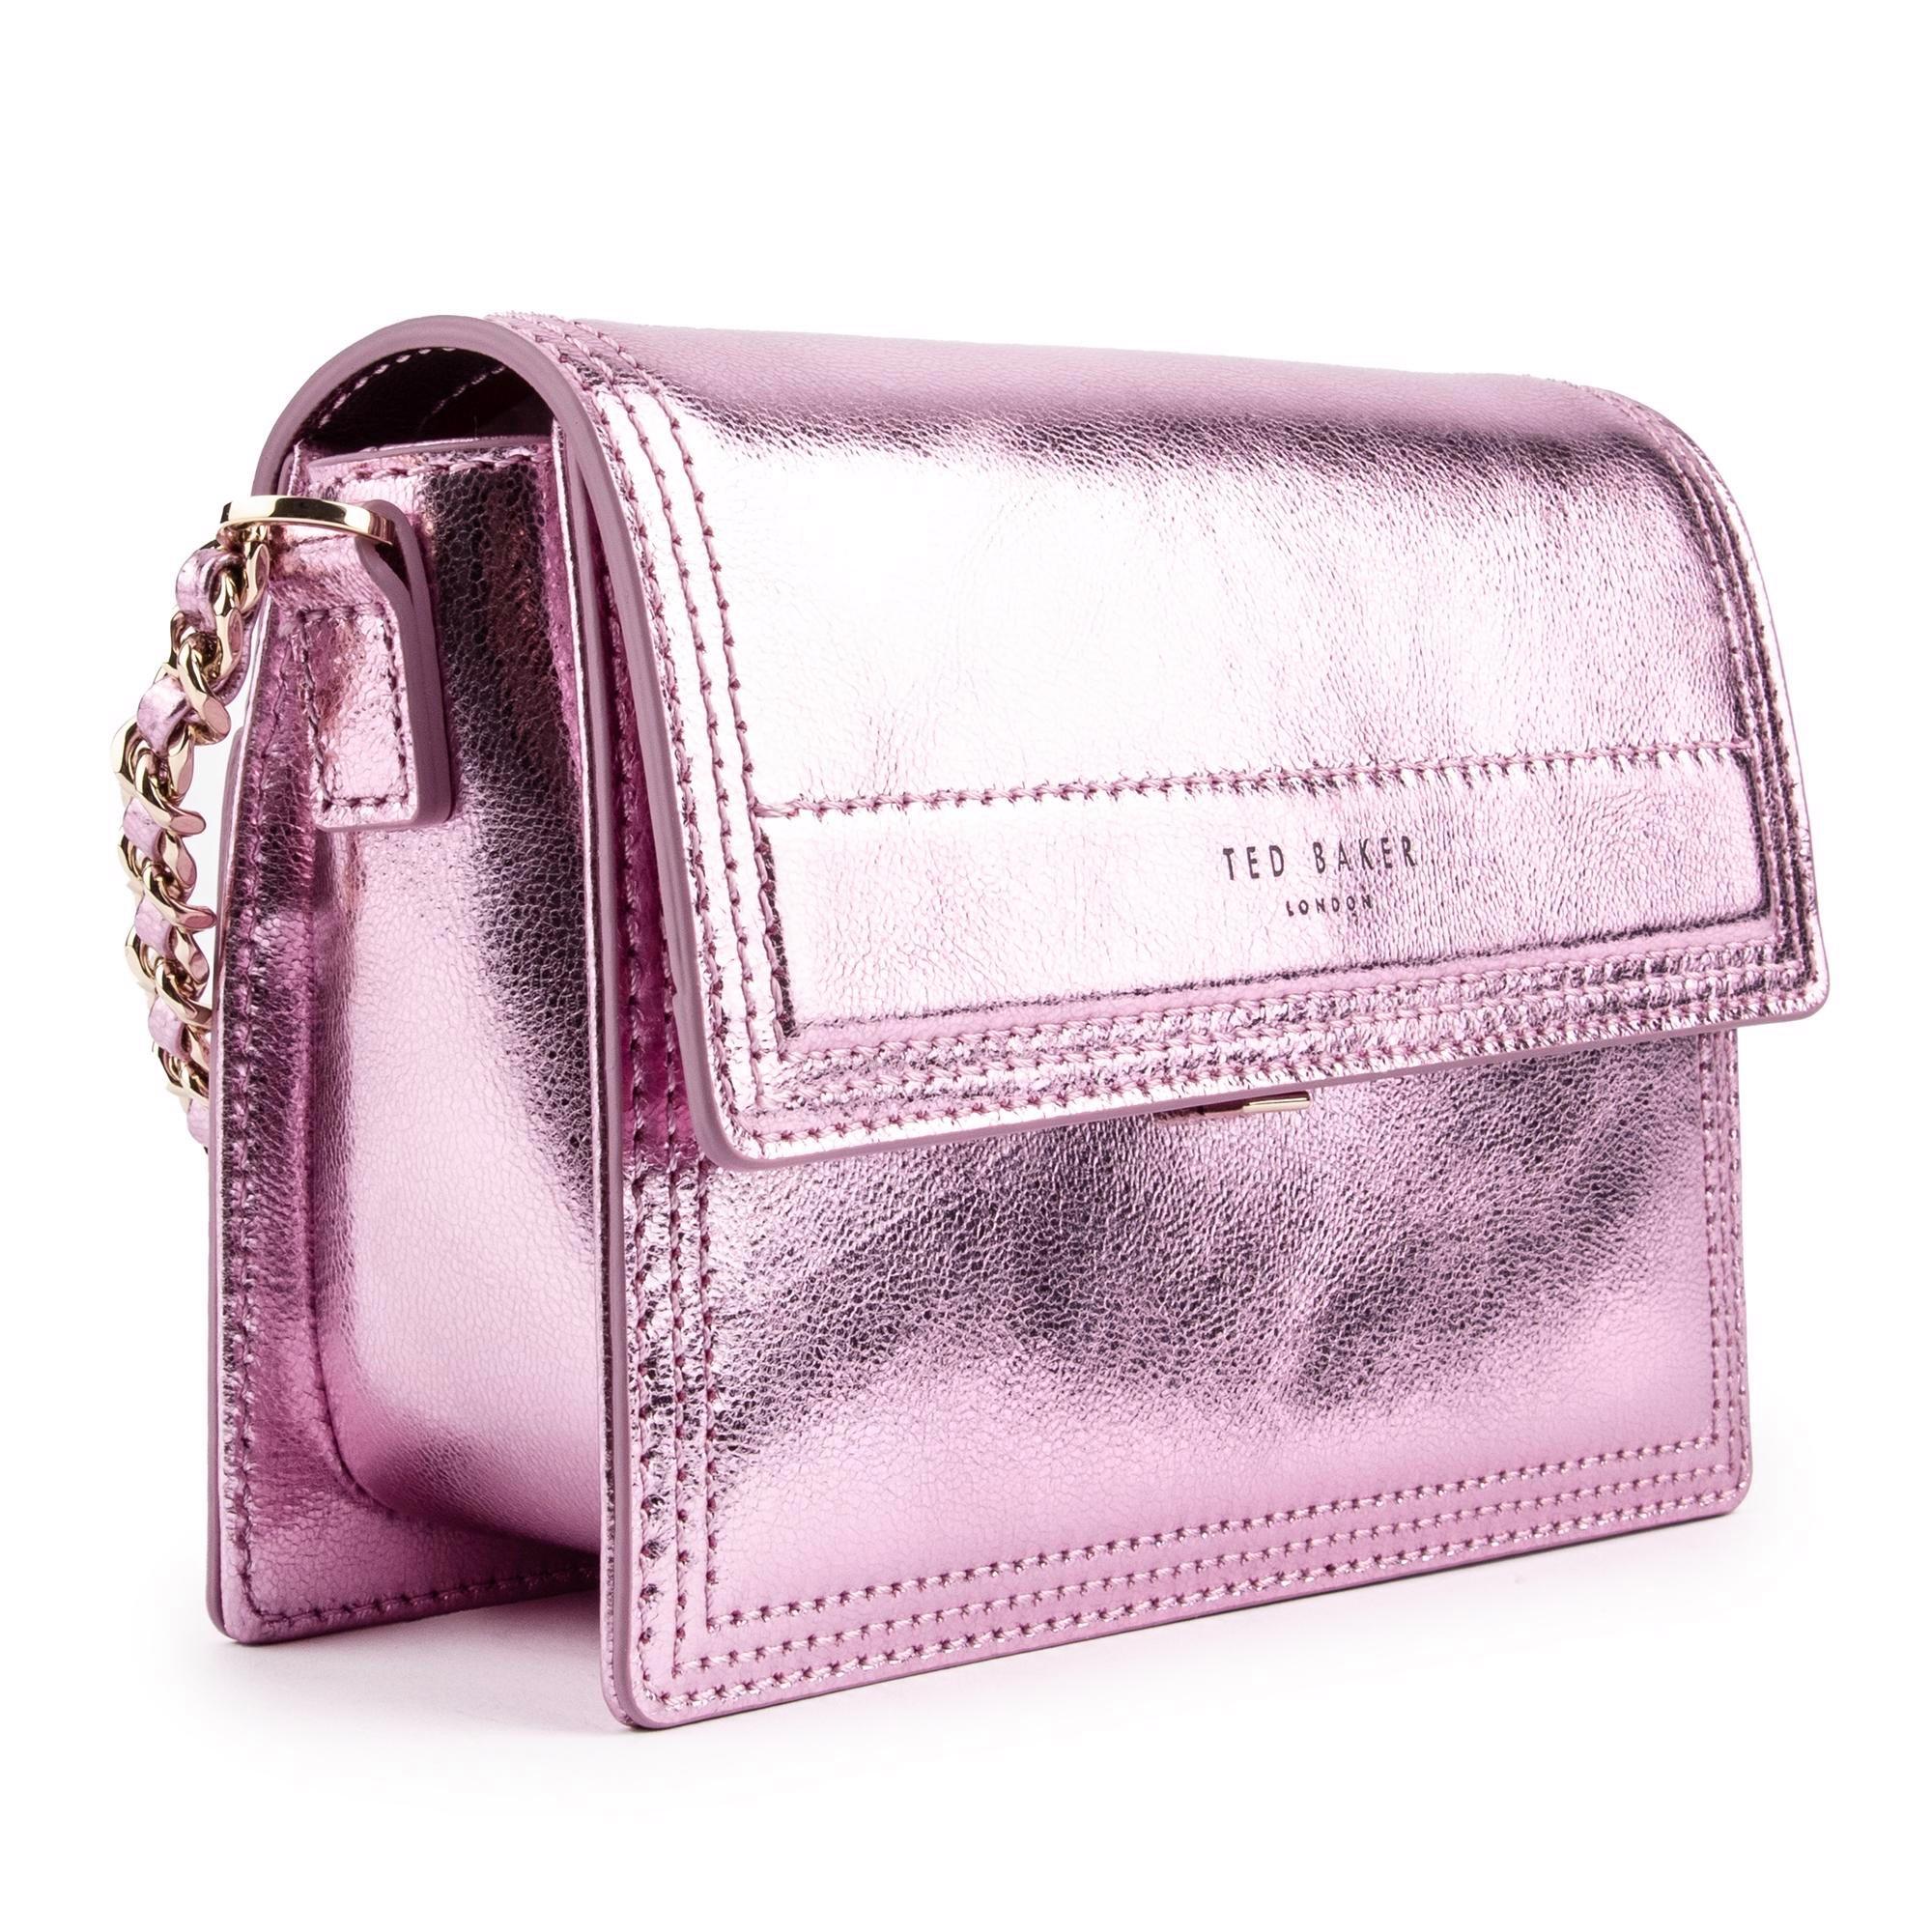 The Ted Baker Bags Currently In My Shopping Cart - PurseBlog